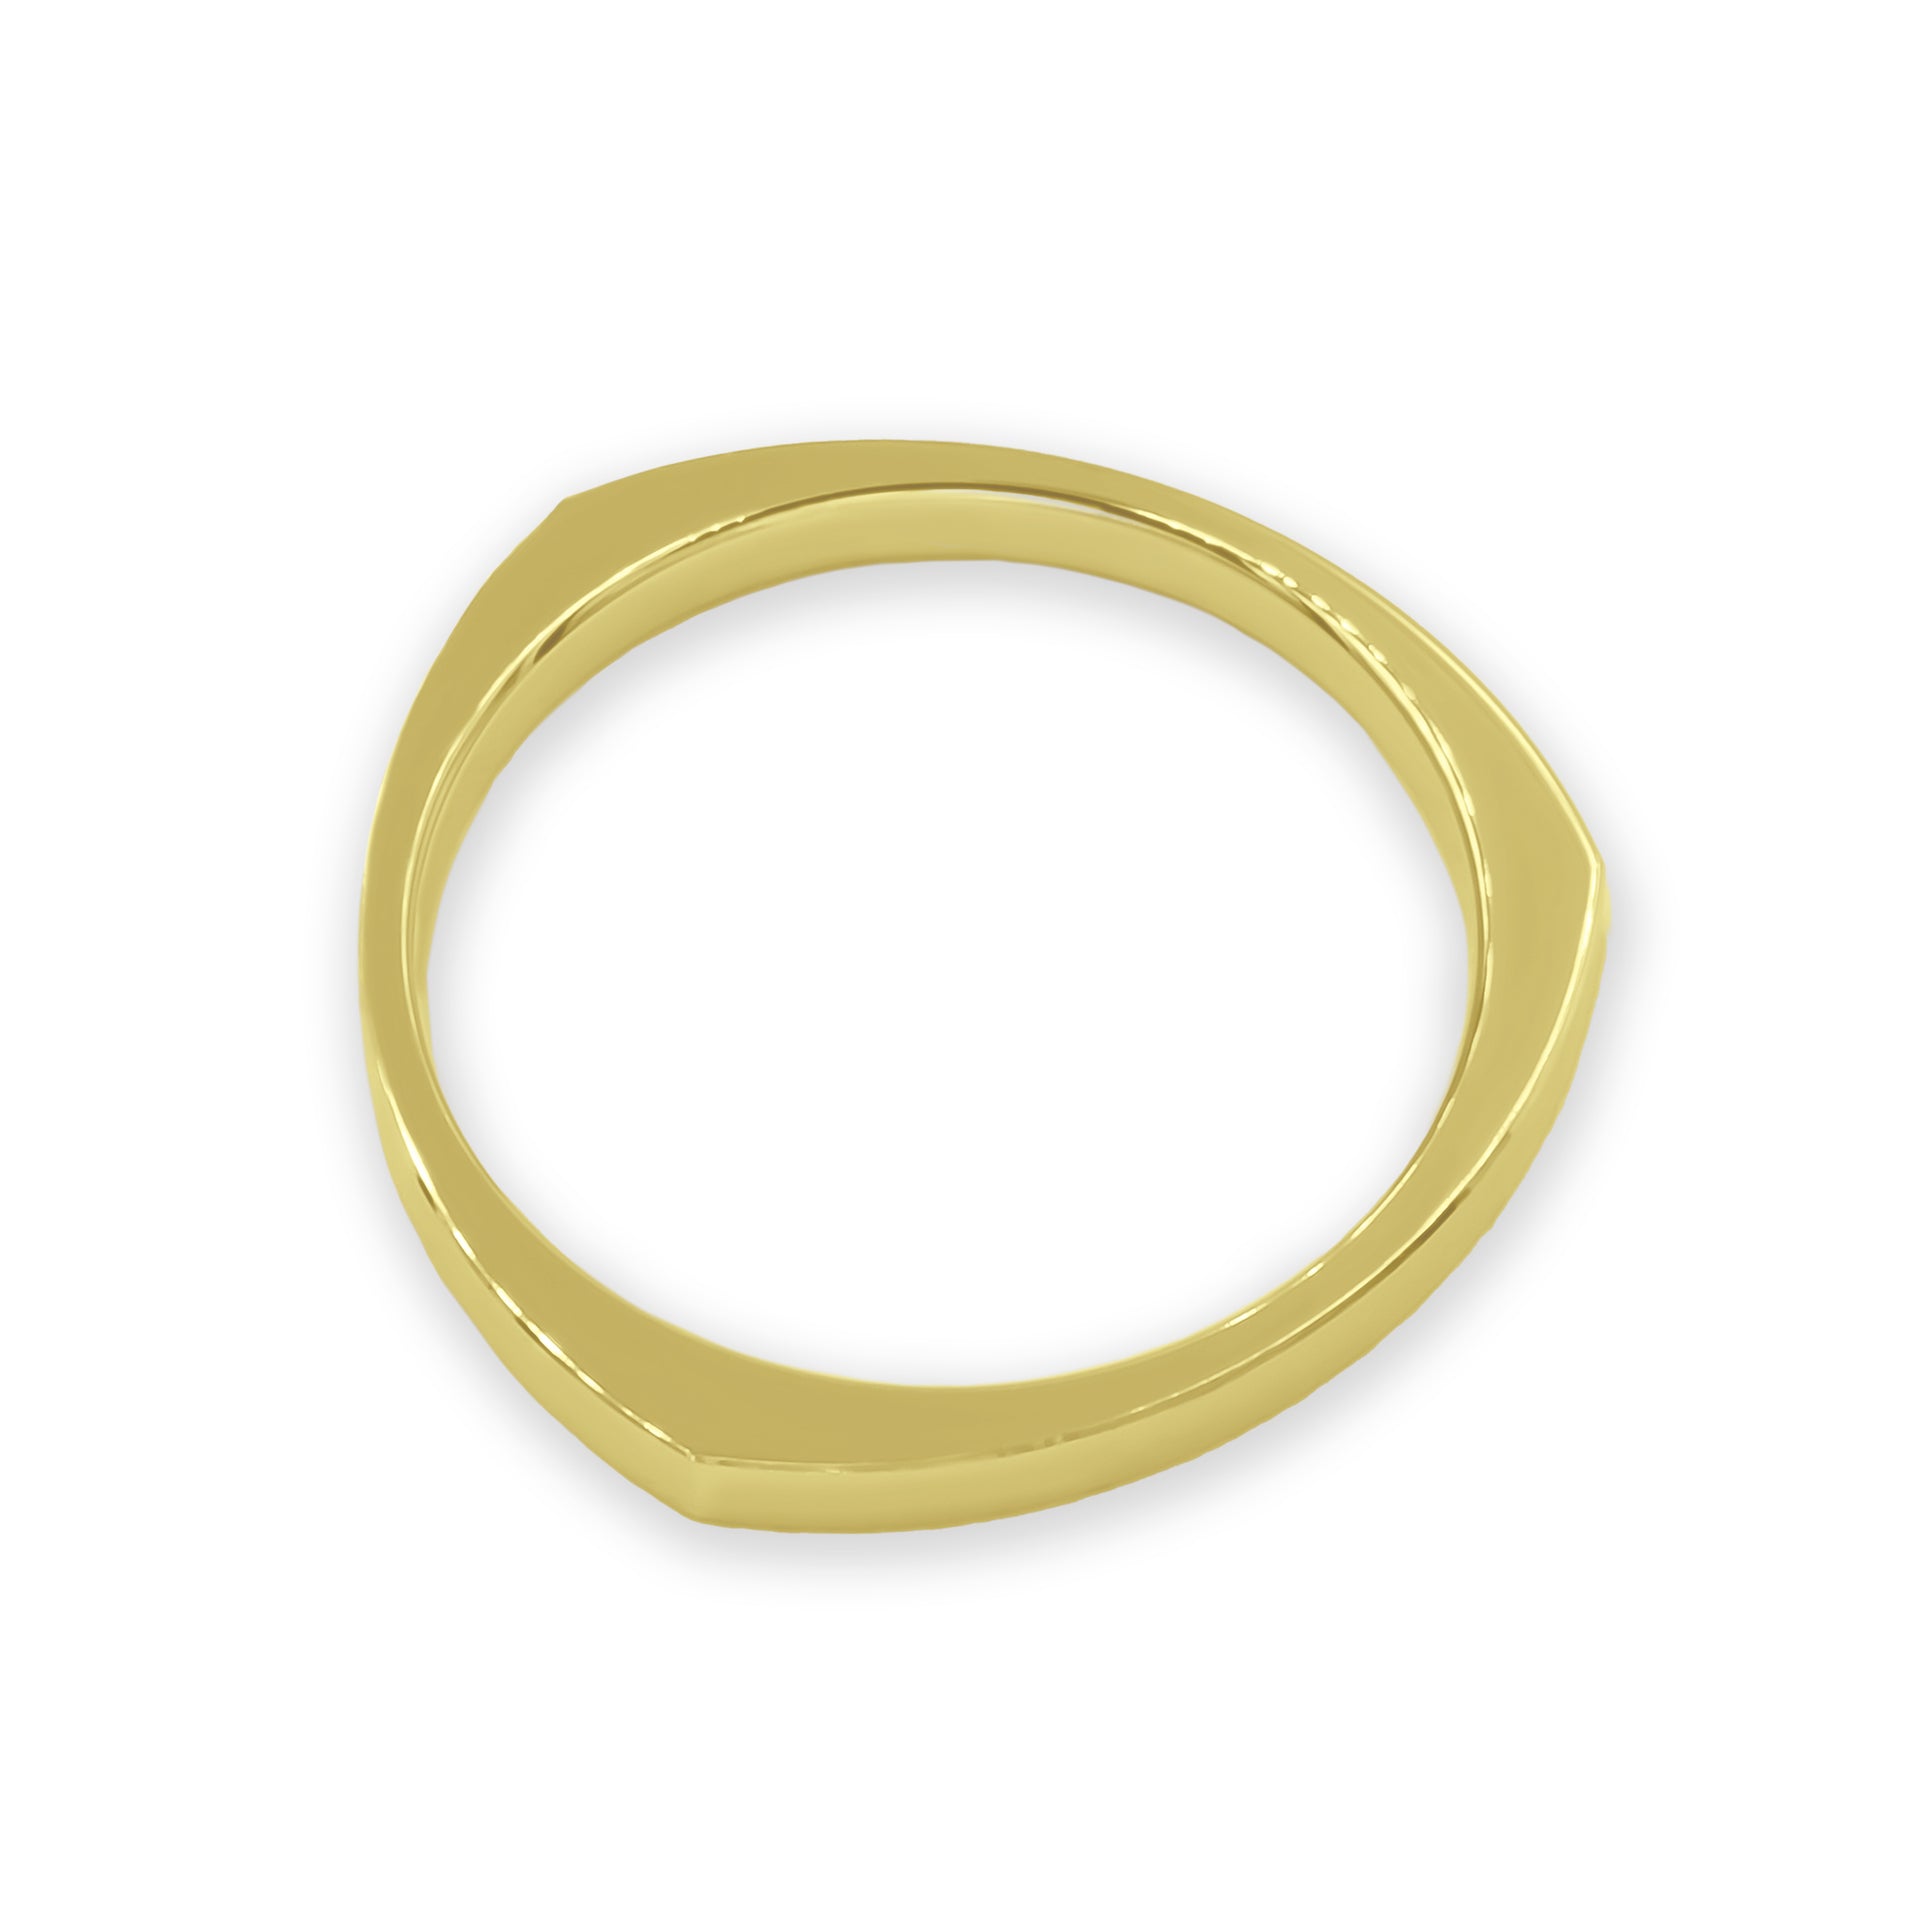 Ring DANCE 2mm triangle shape yellow gold 18k